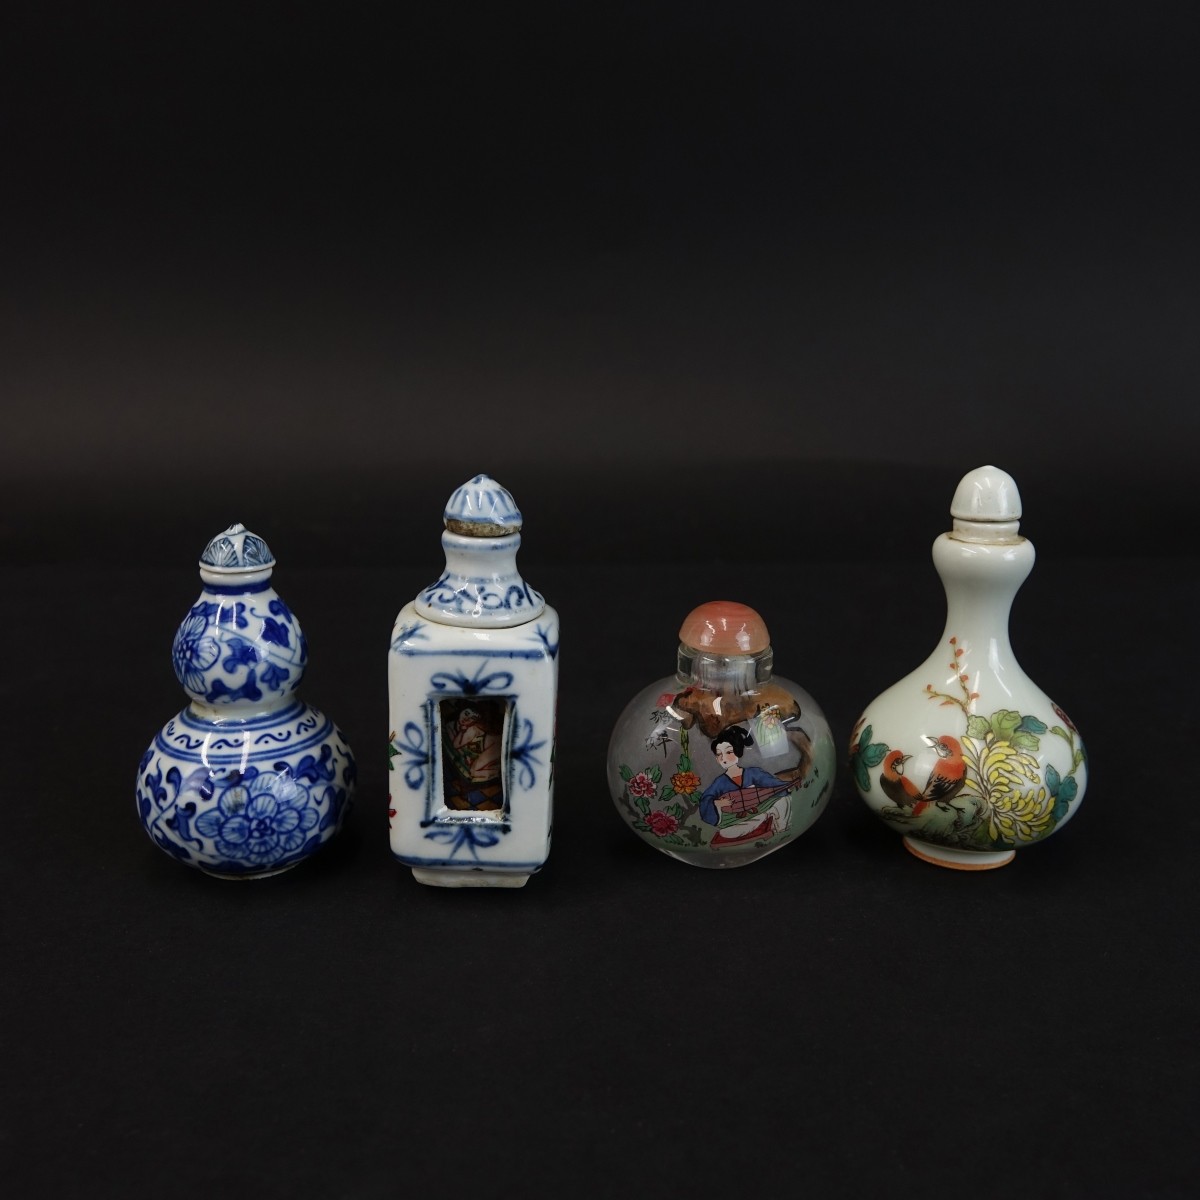 Four (4) Antique Chinese Snuff Bottles